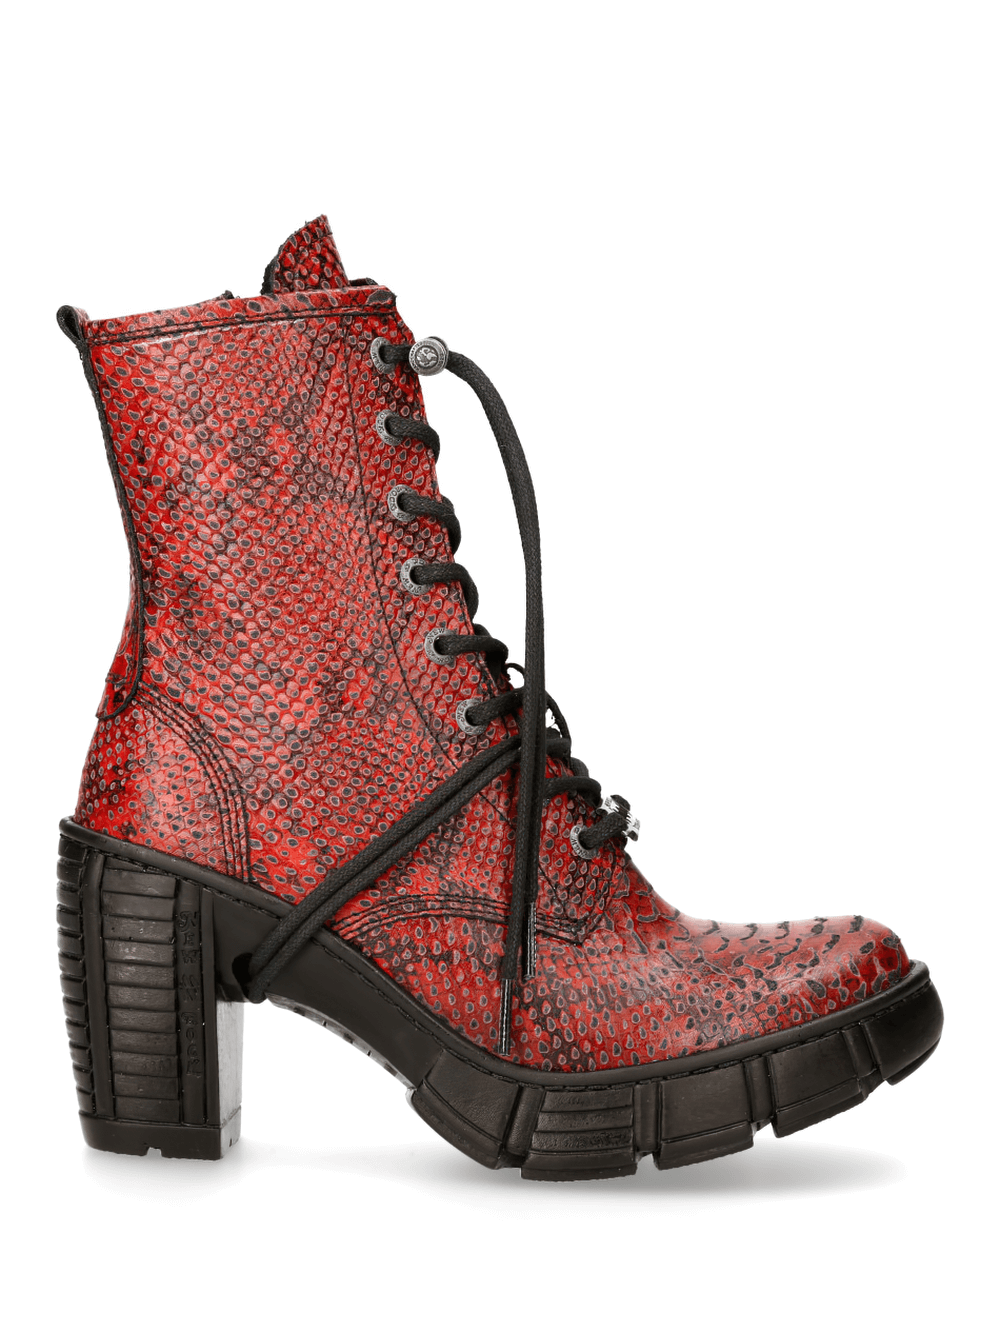 NEW ROCK Gothic Edgy Red Reptile Print Ankle Boots